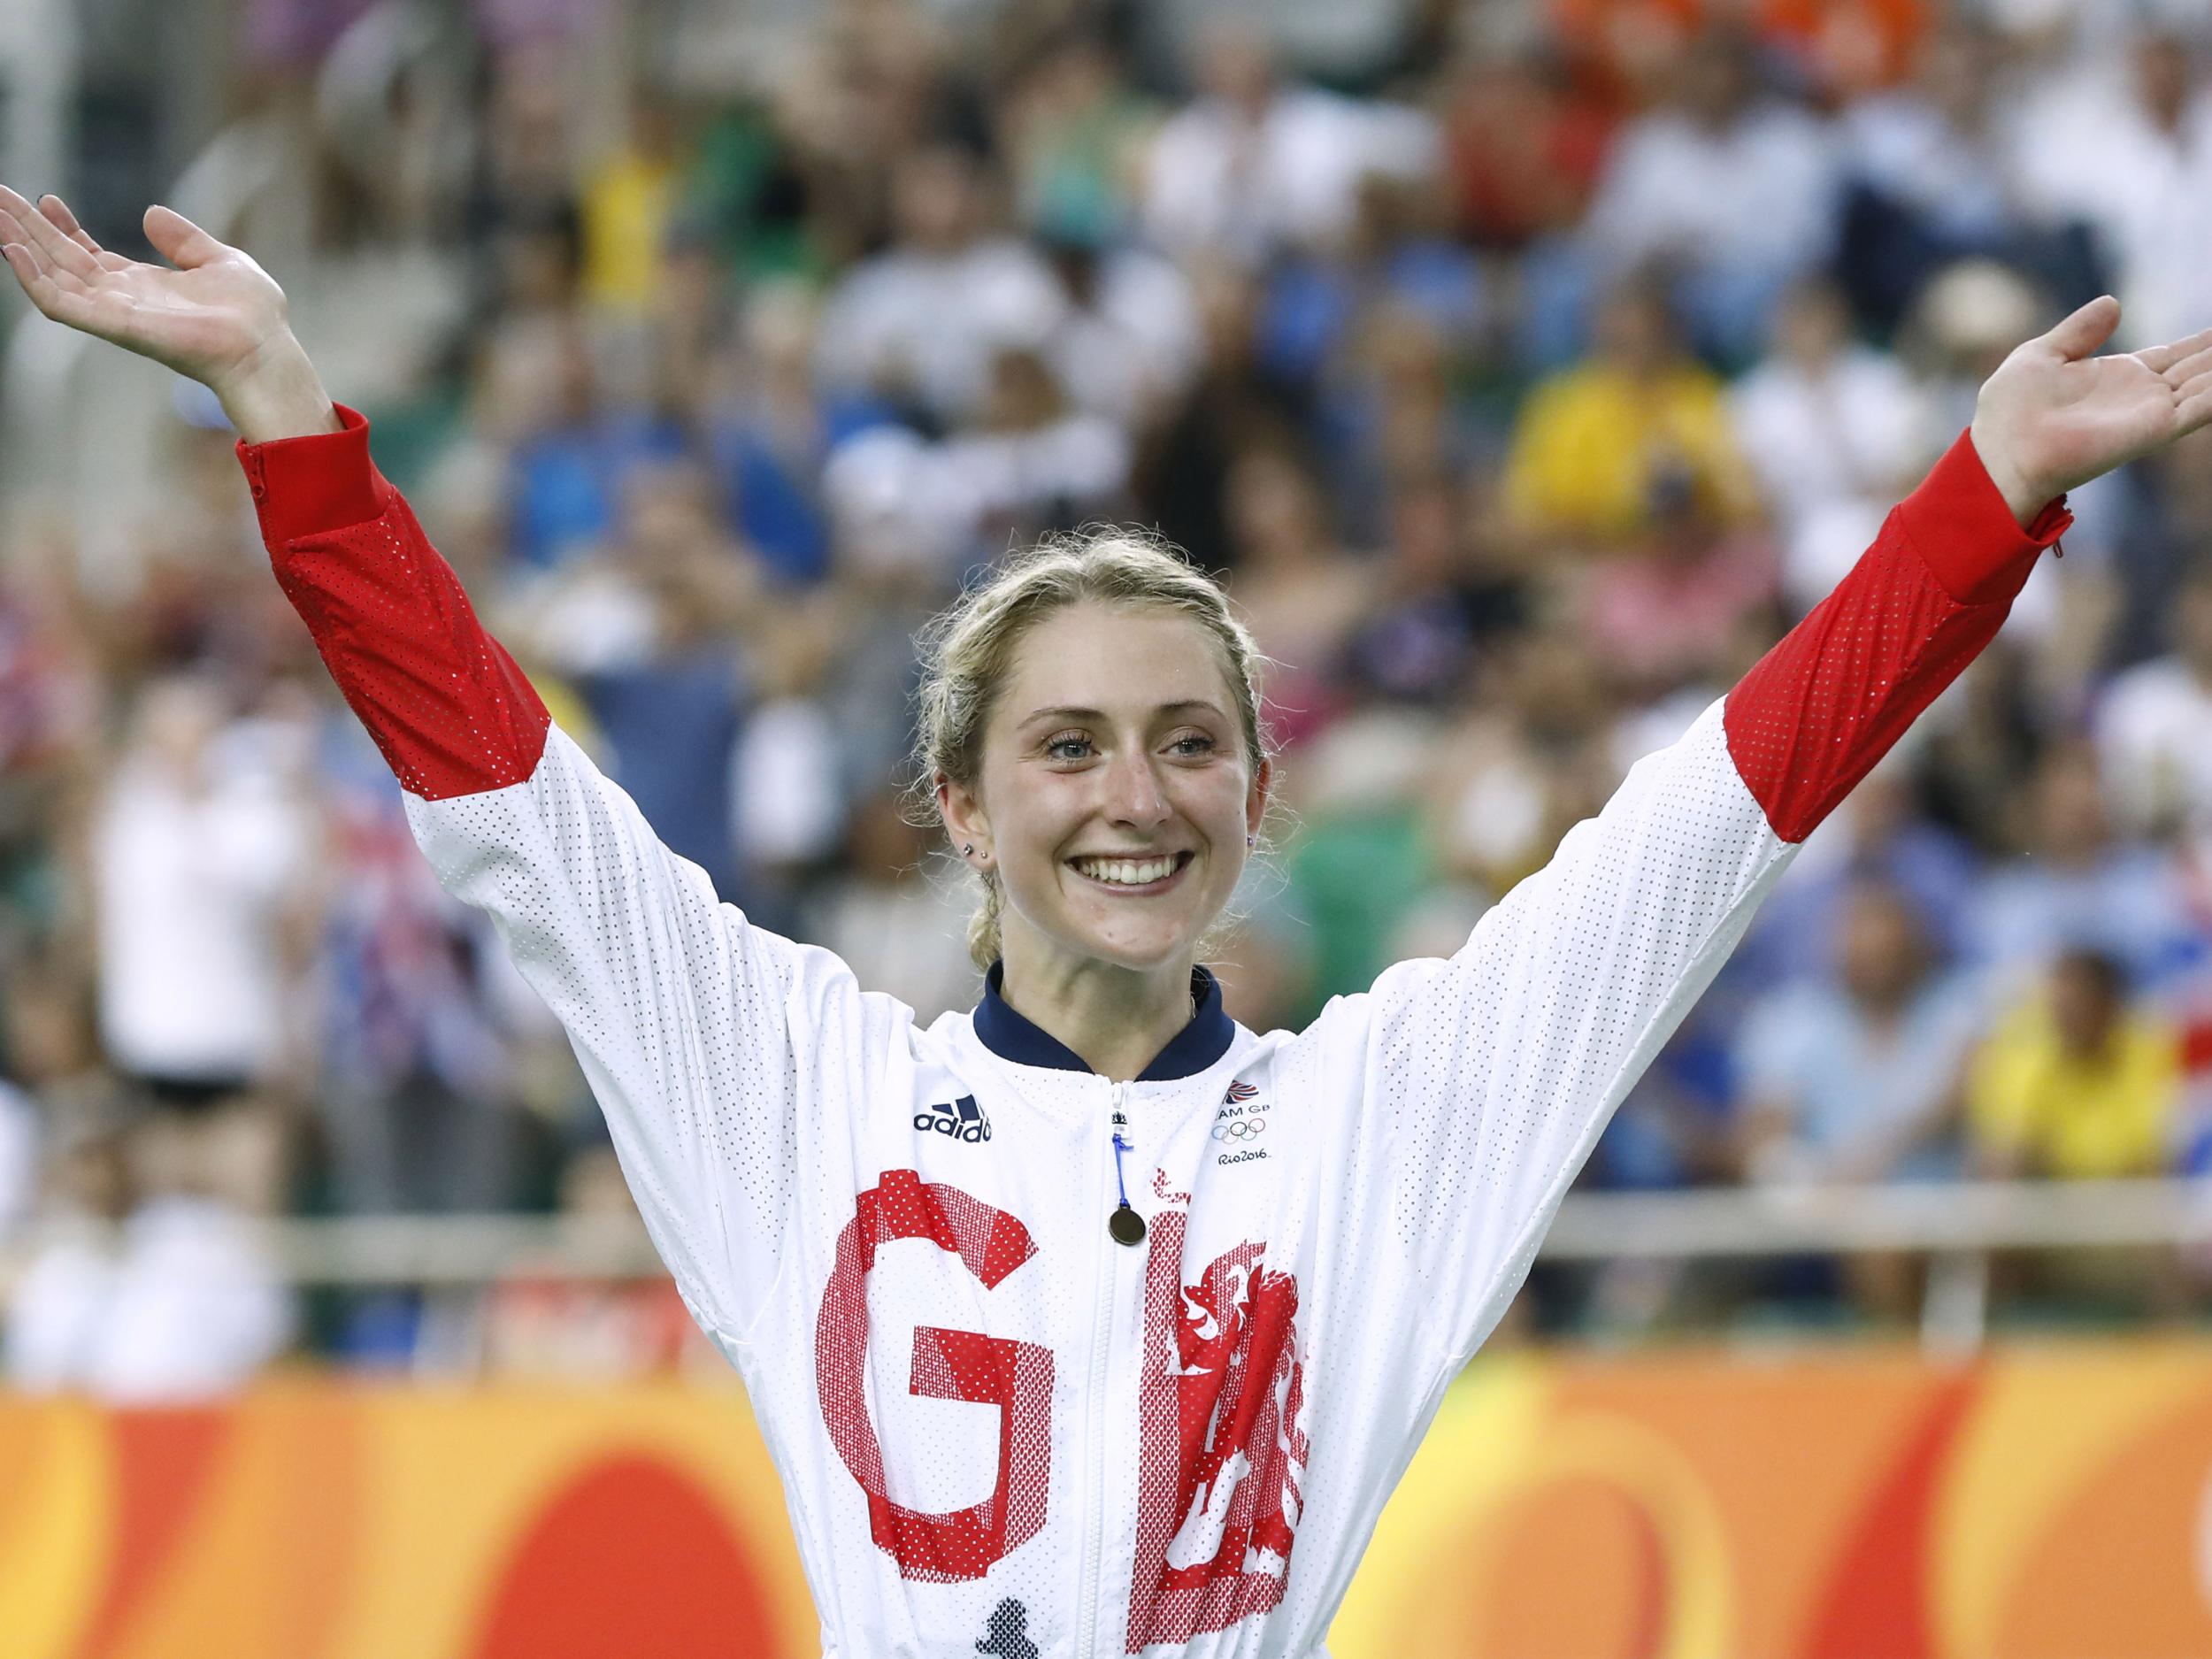 Gold medallist Laura Kenny (then Trott) at the Rio 2016 Olympic Games